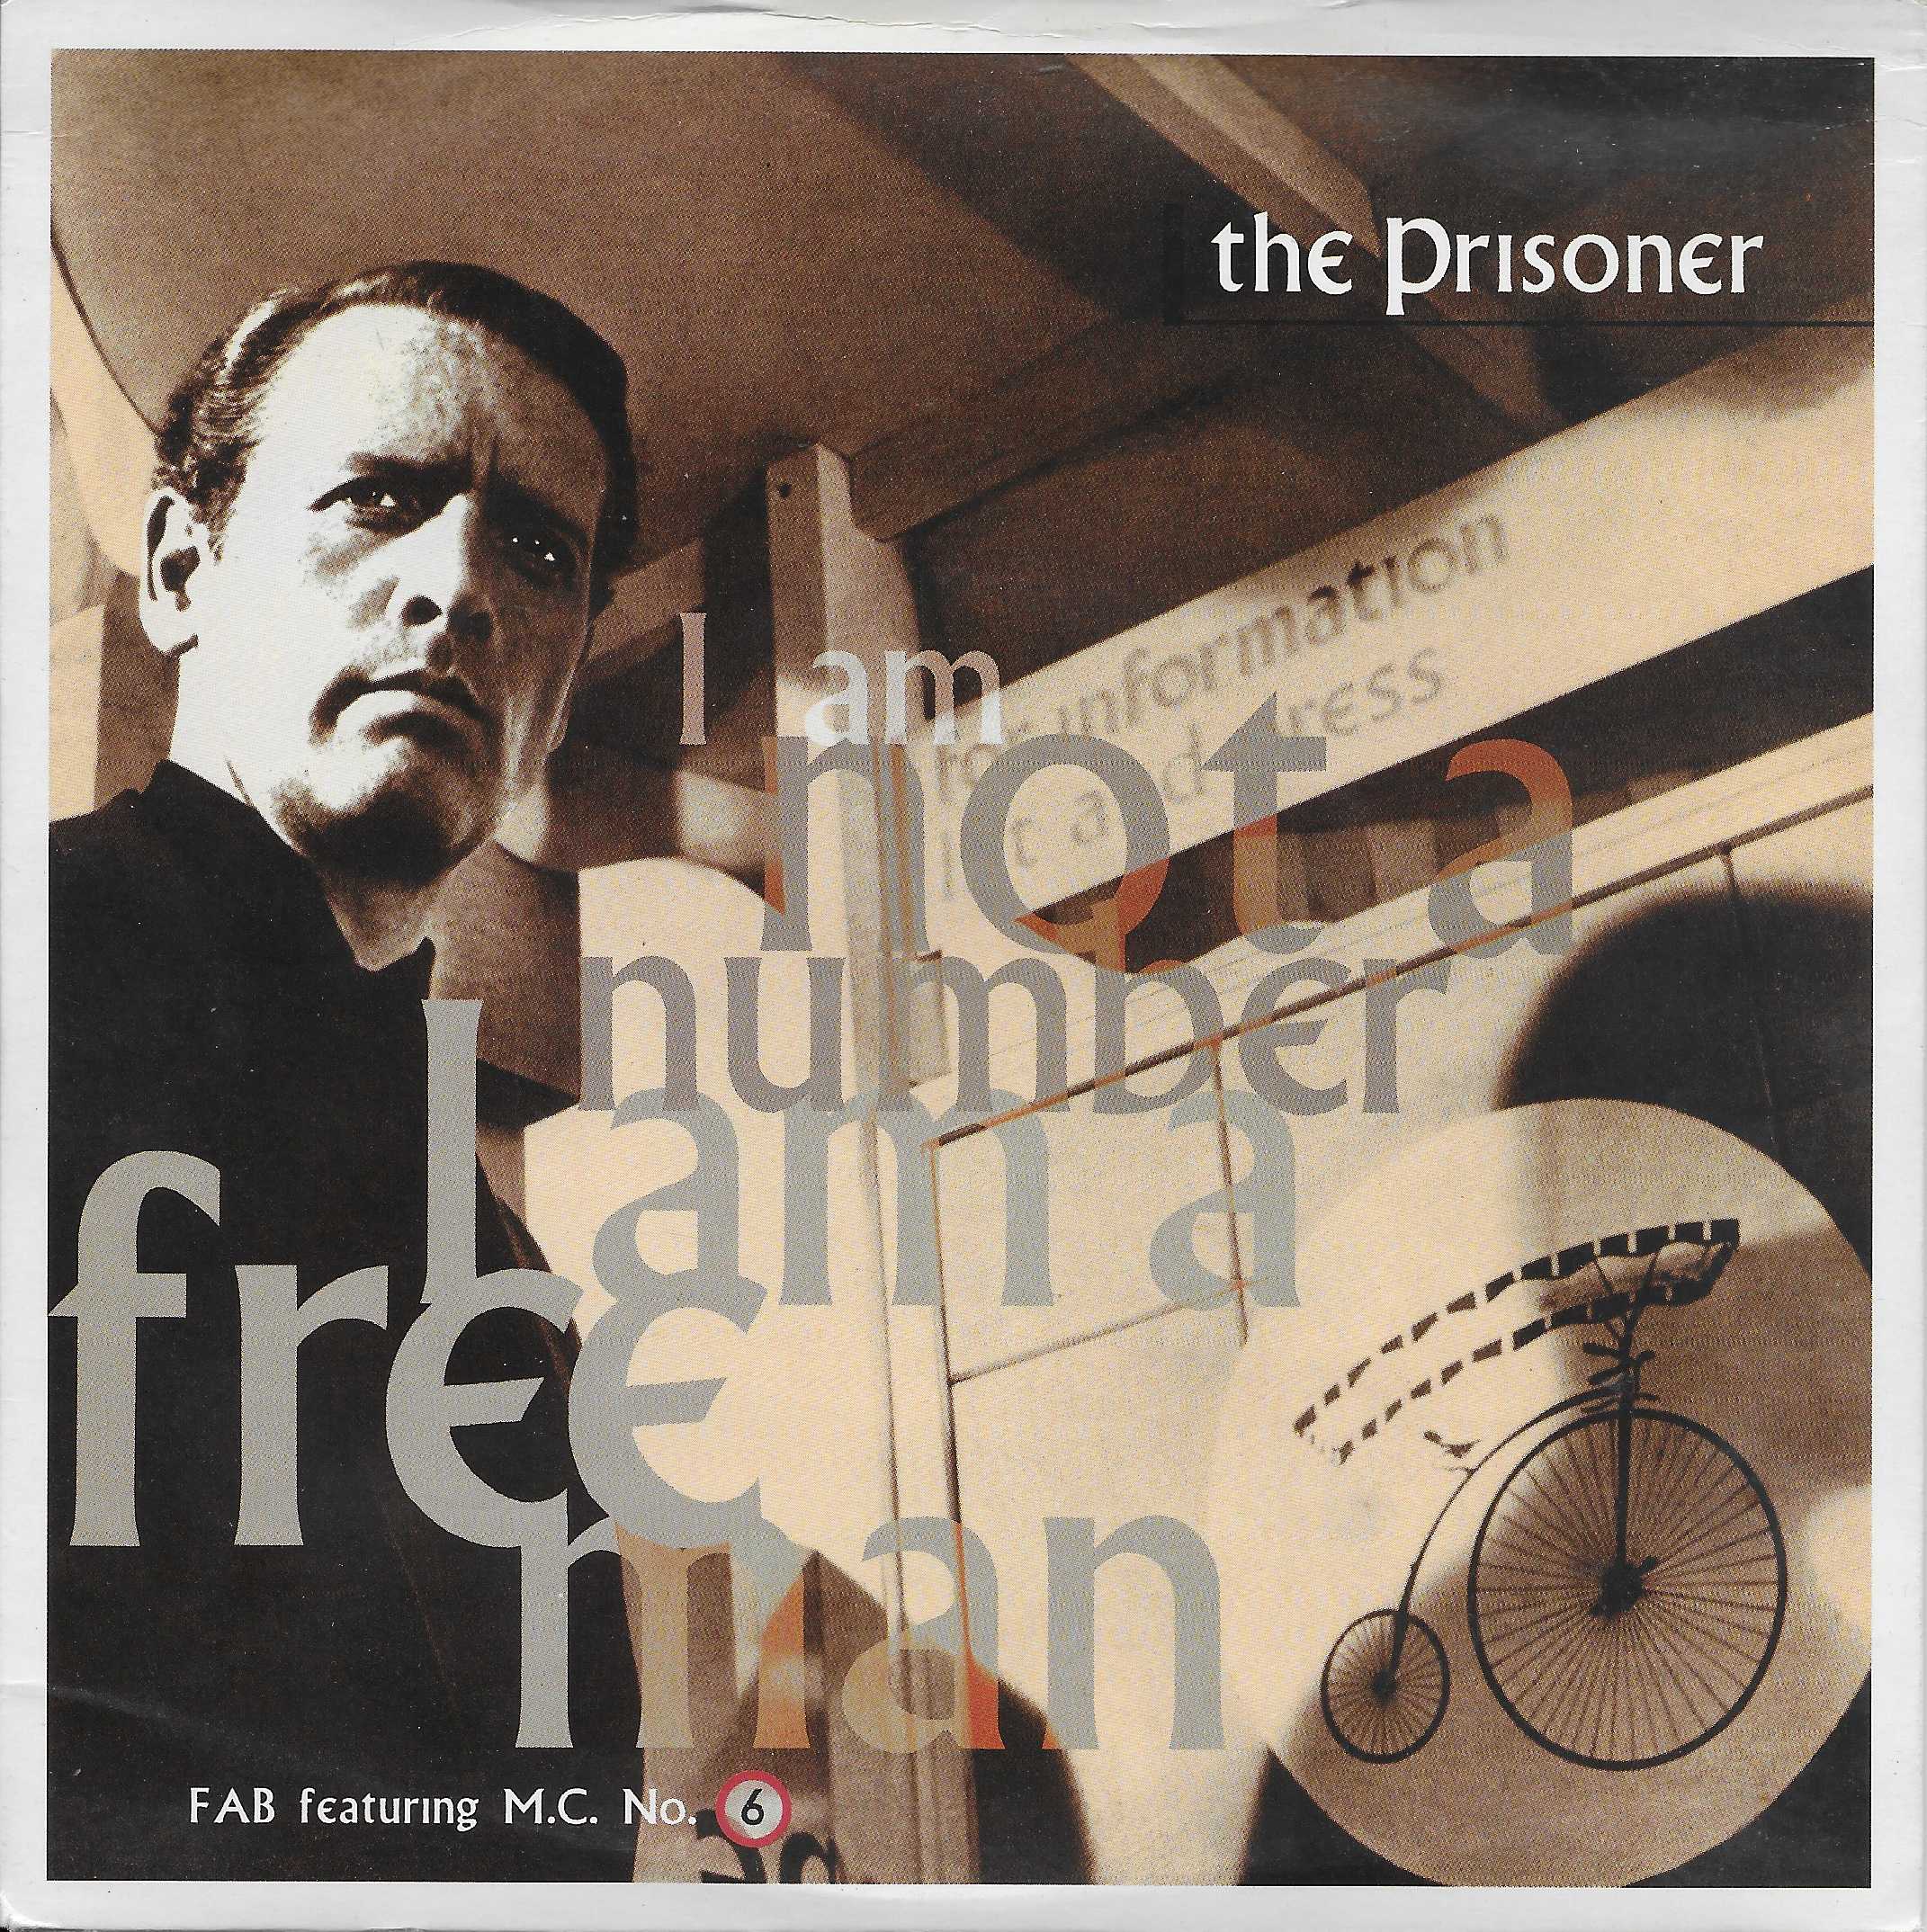 Picture of FAB 6 The prisoner (Free man mix) by artist Ron Grainer / F. A. B. from ITV, Channel 4 and Channel 5 singles library